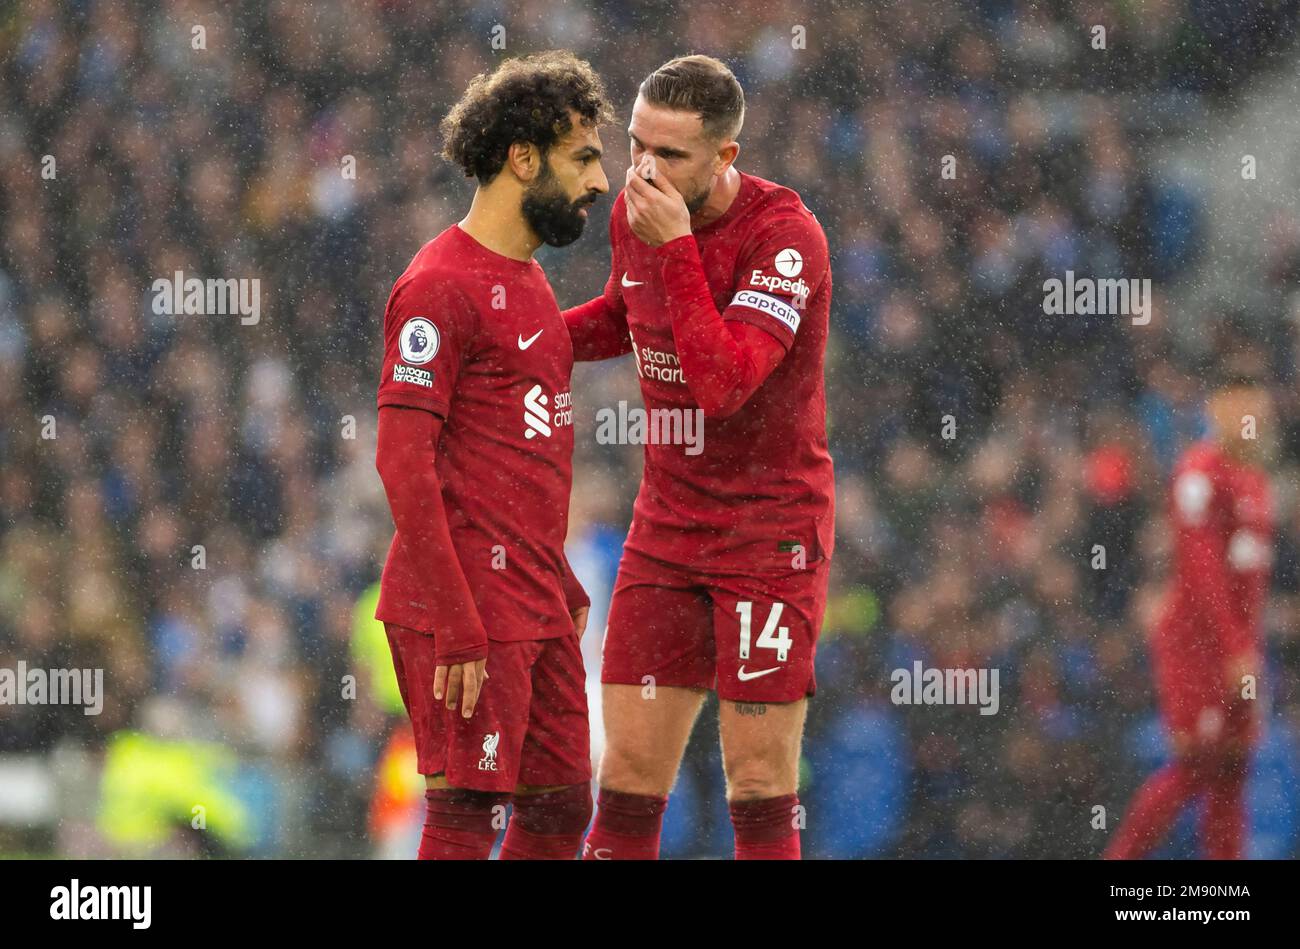 Brighton v Liverpool Premiership match at The Amex 14th January 2023 - Jordan Henderson has a word with Mohamed Salah during the match Stock Photo